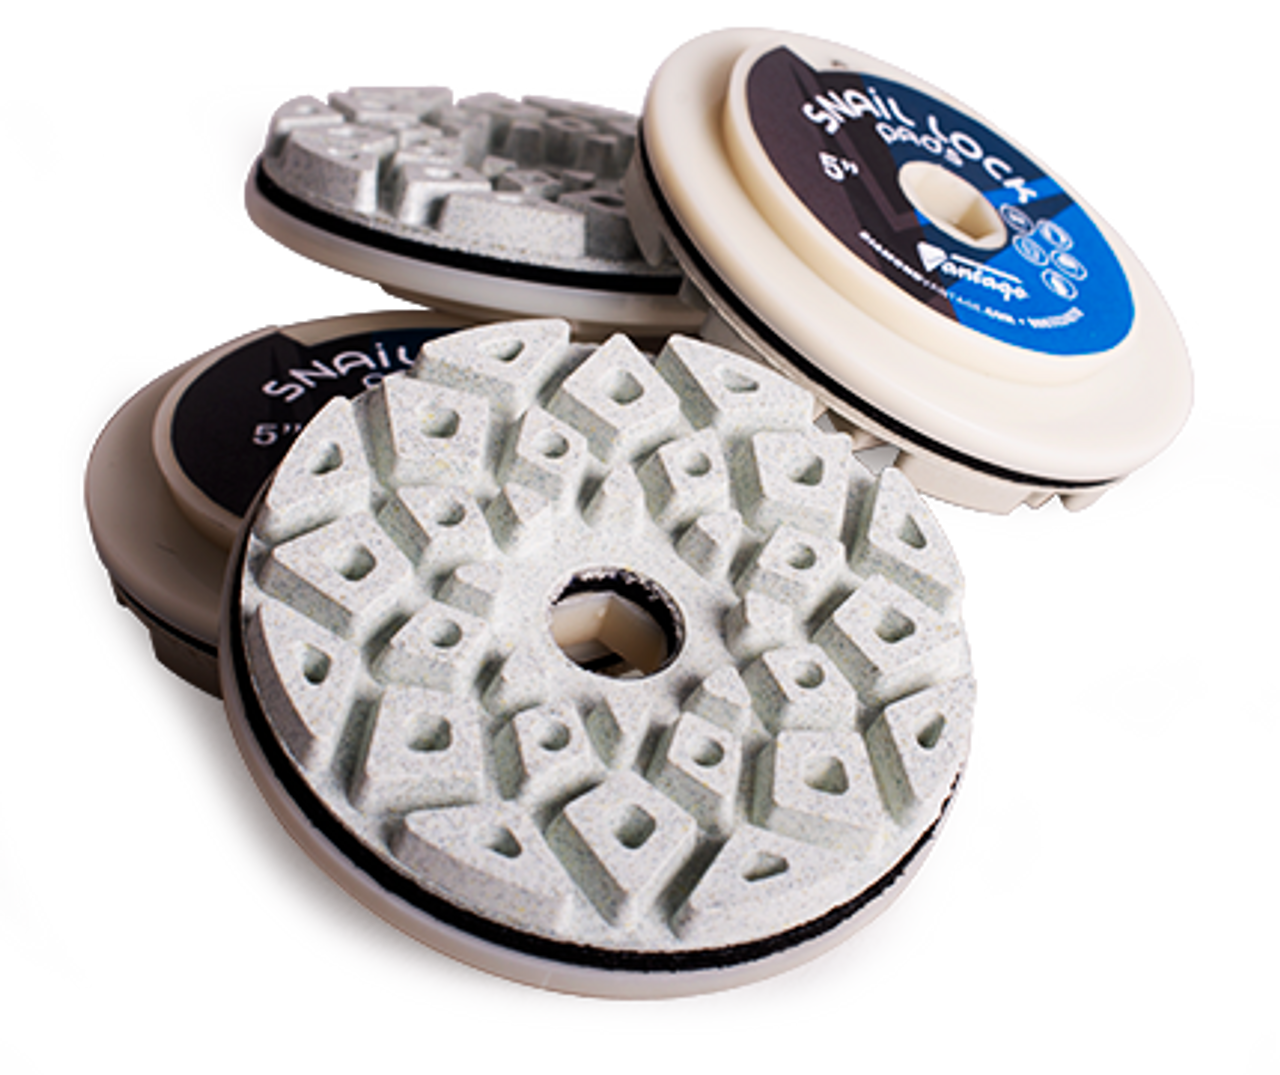 Diamond Vantage 6? x Snail Lock In-Line Polishing Pad for Natural and Engineered Stone, 200 Grit